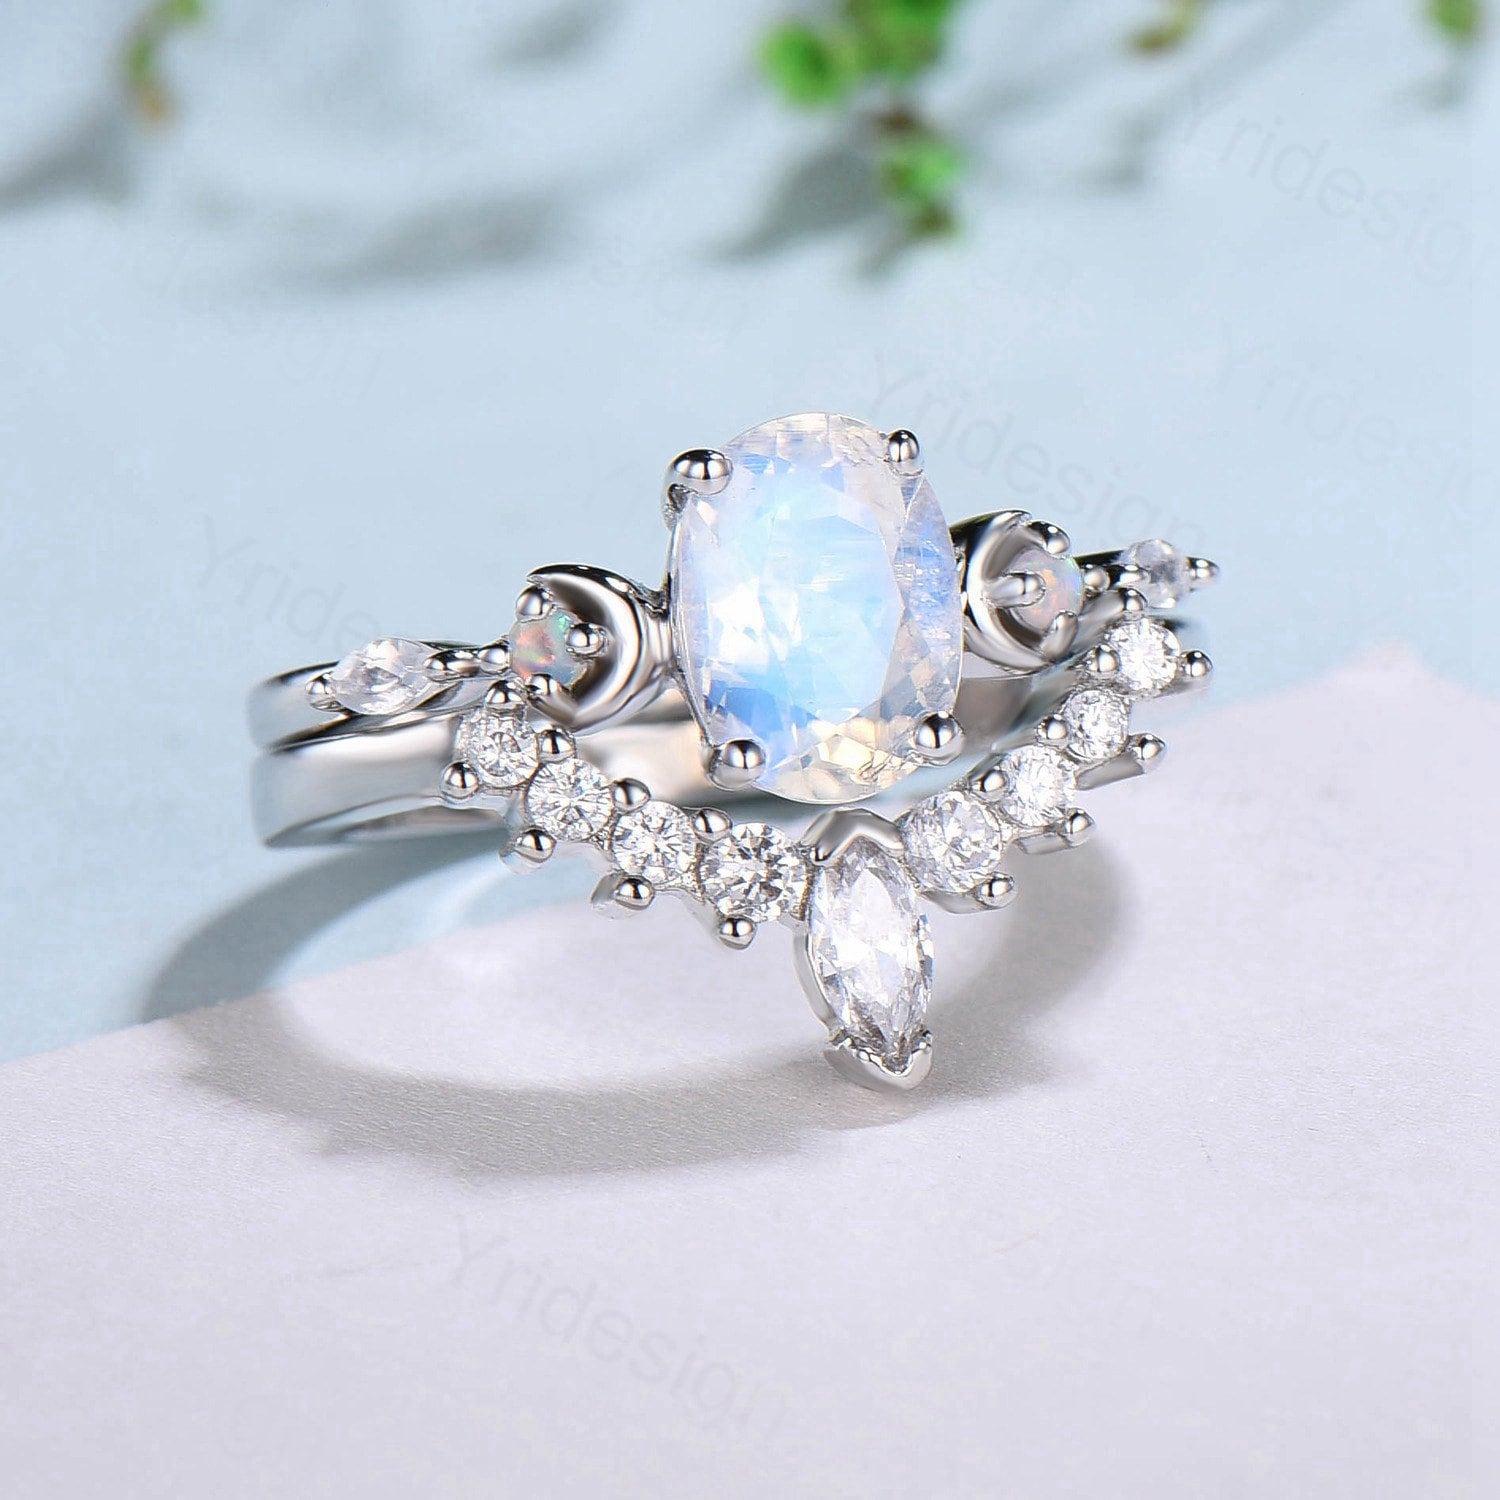 Rose Gold Oval Cut Moonstone Dainty Engagement Ring - MollyJewelryUS